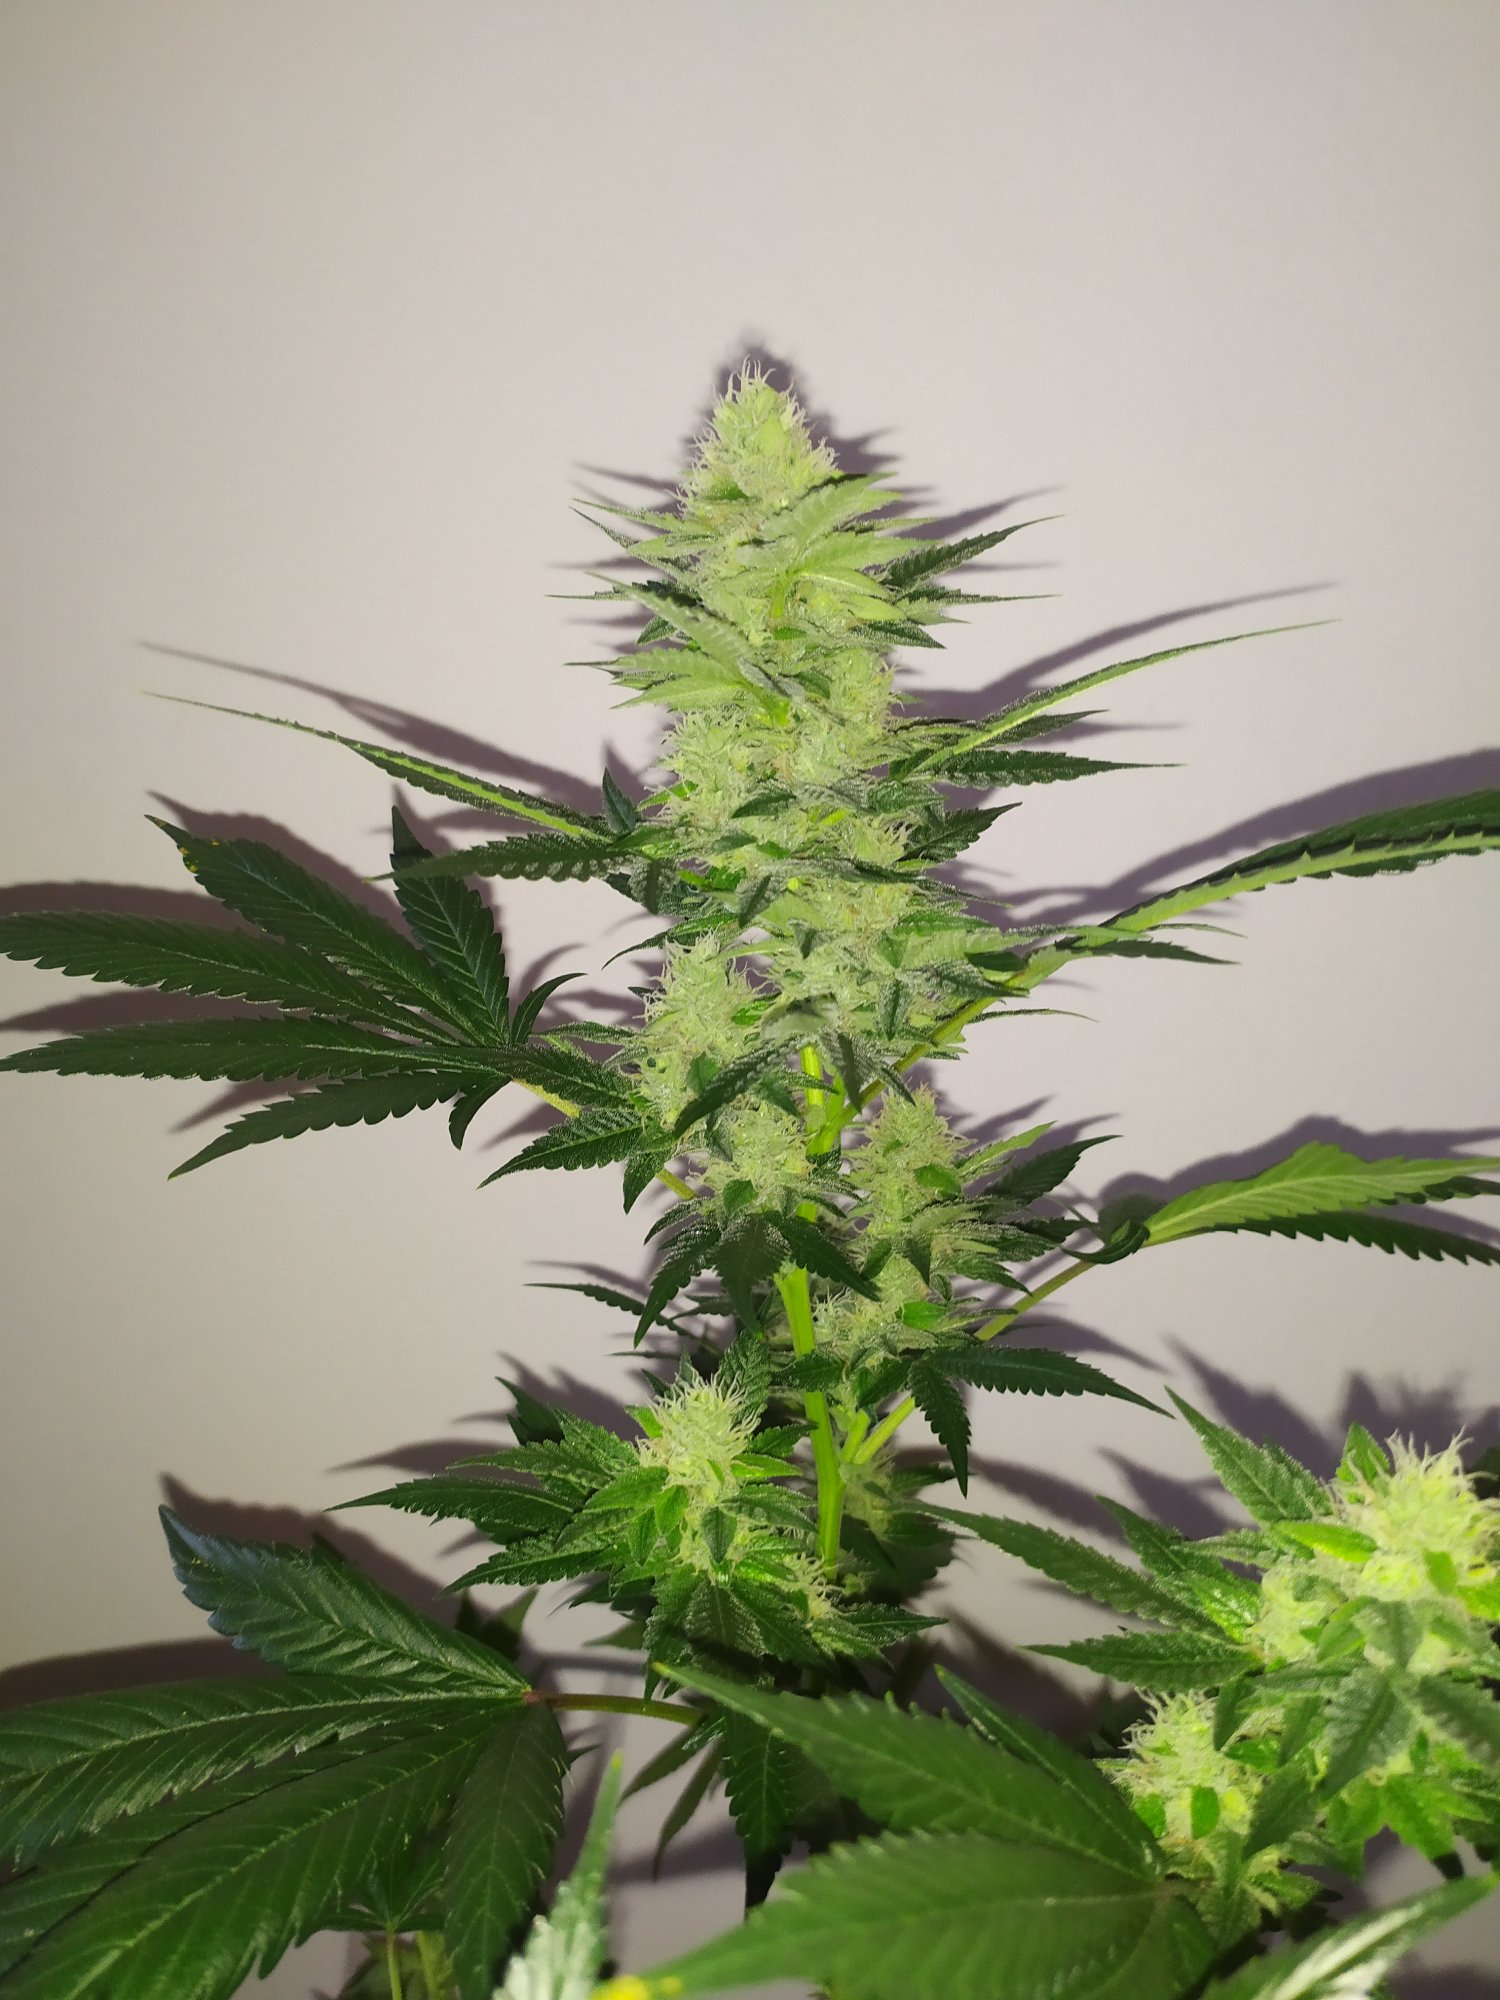 Tips for growing the original gg4 cut 5